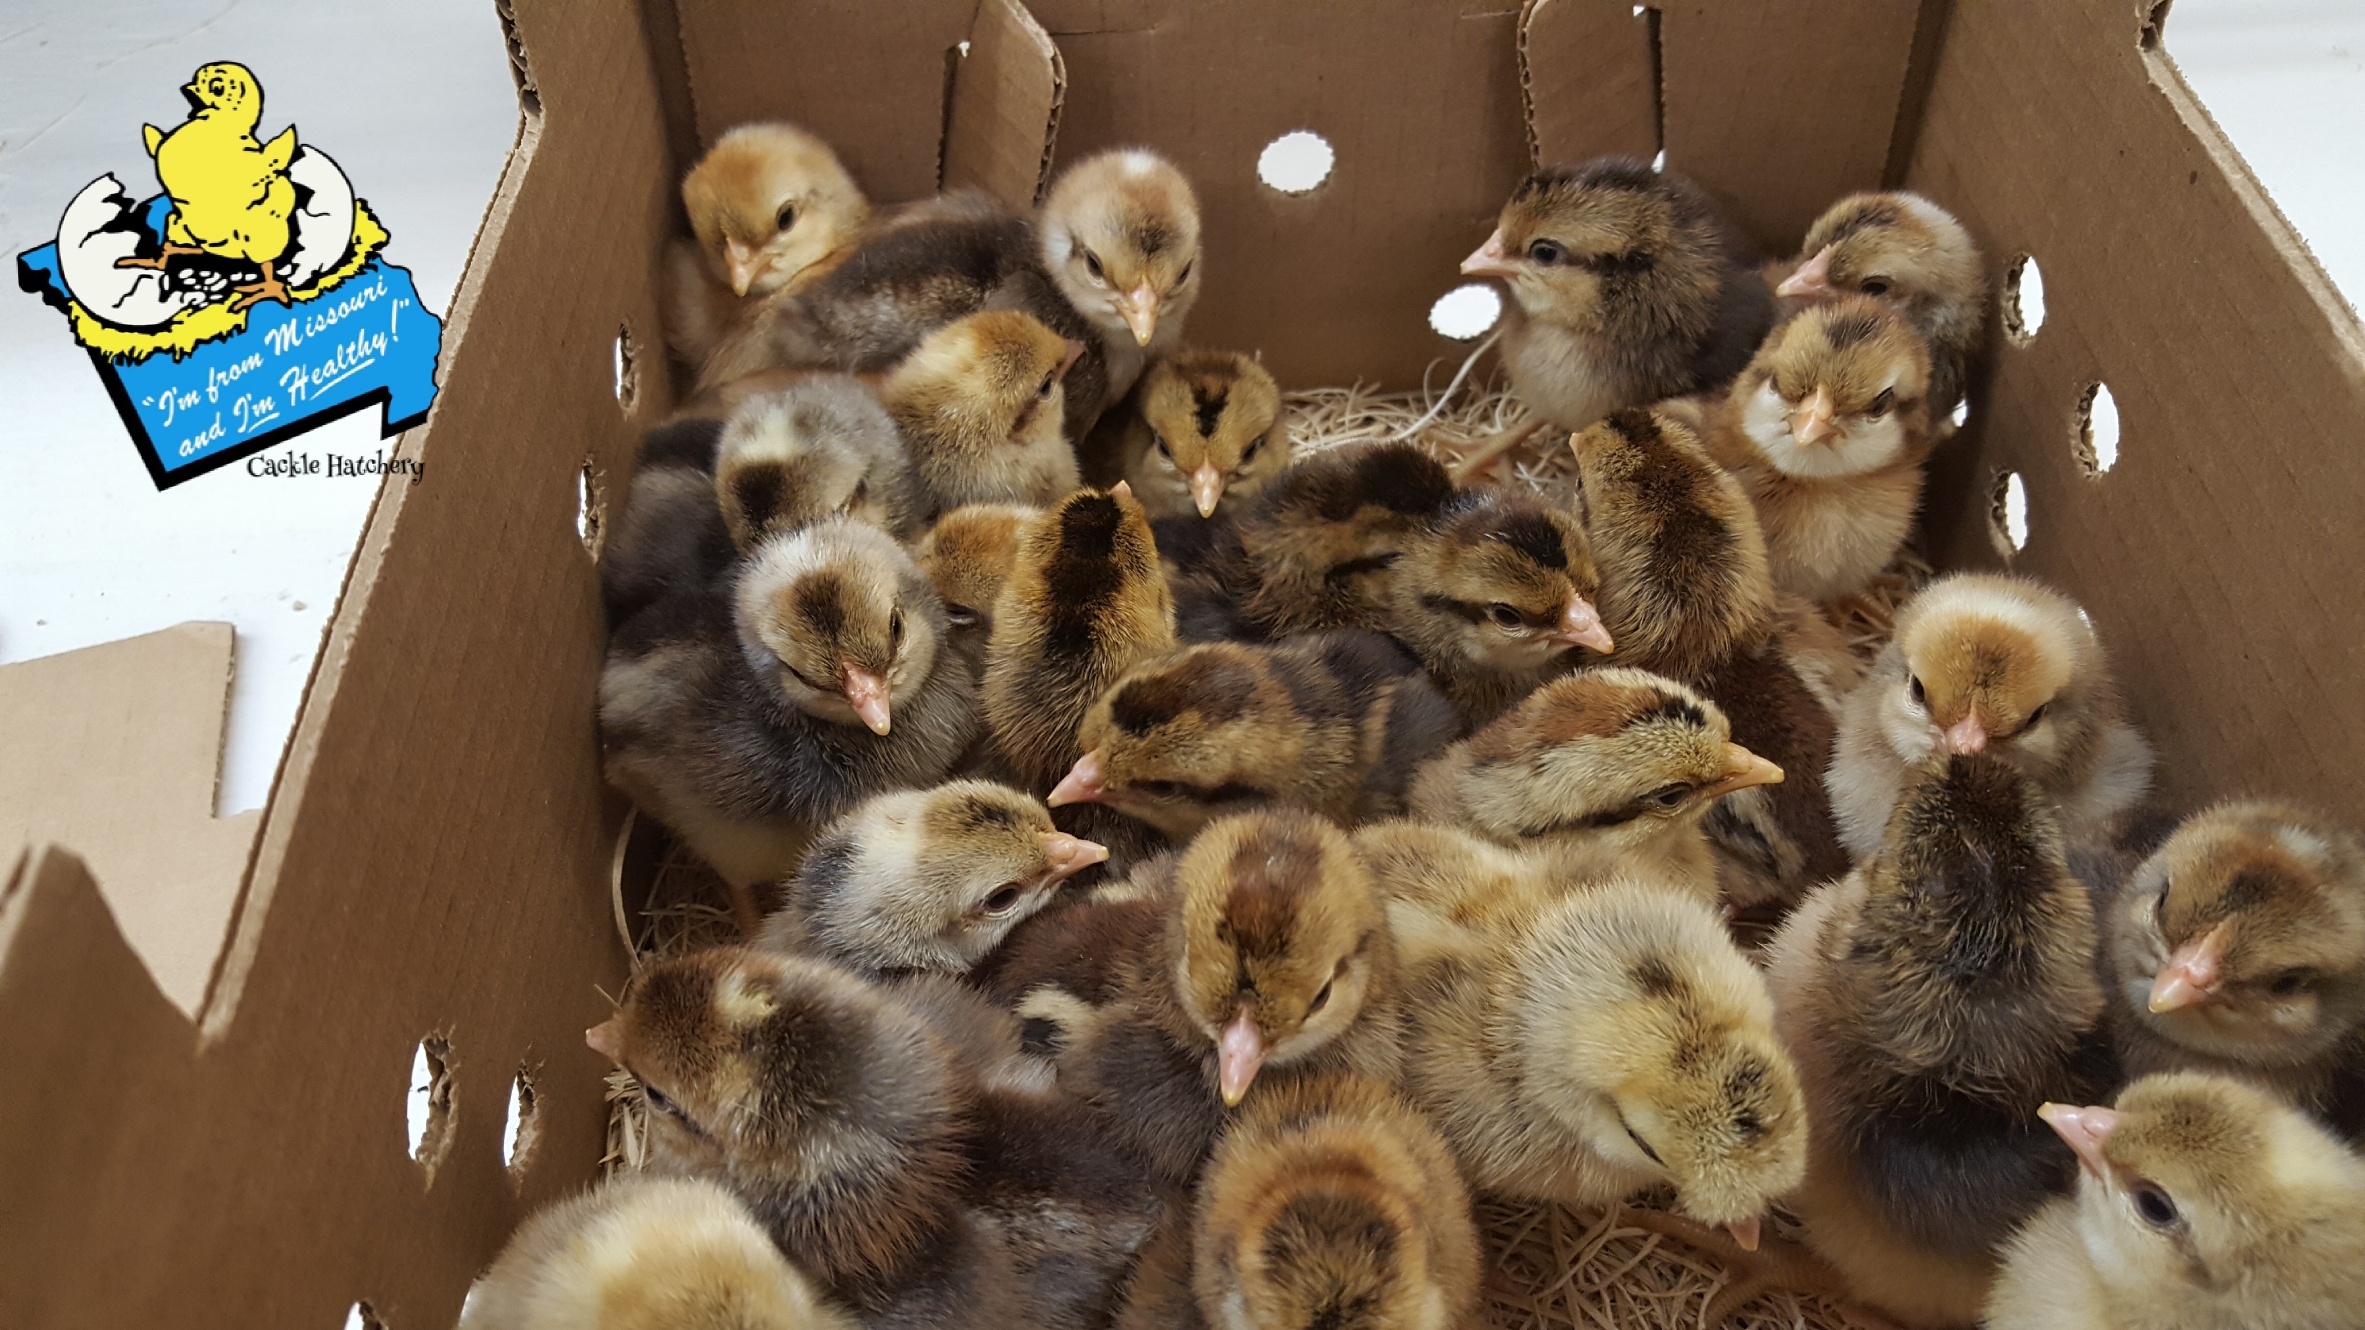 New backyard residents: OKC city council approves chickens, quail on lots under an acre